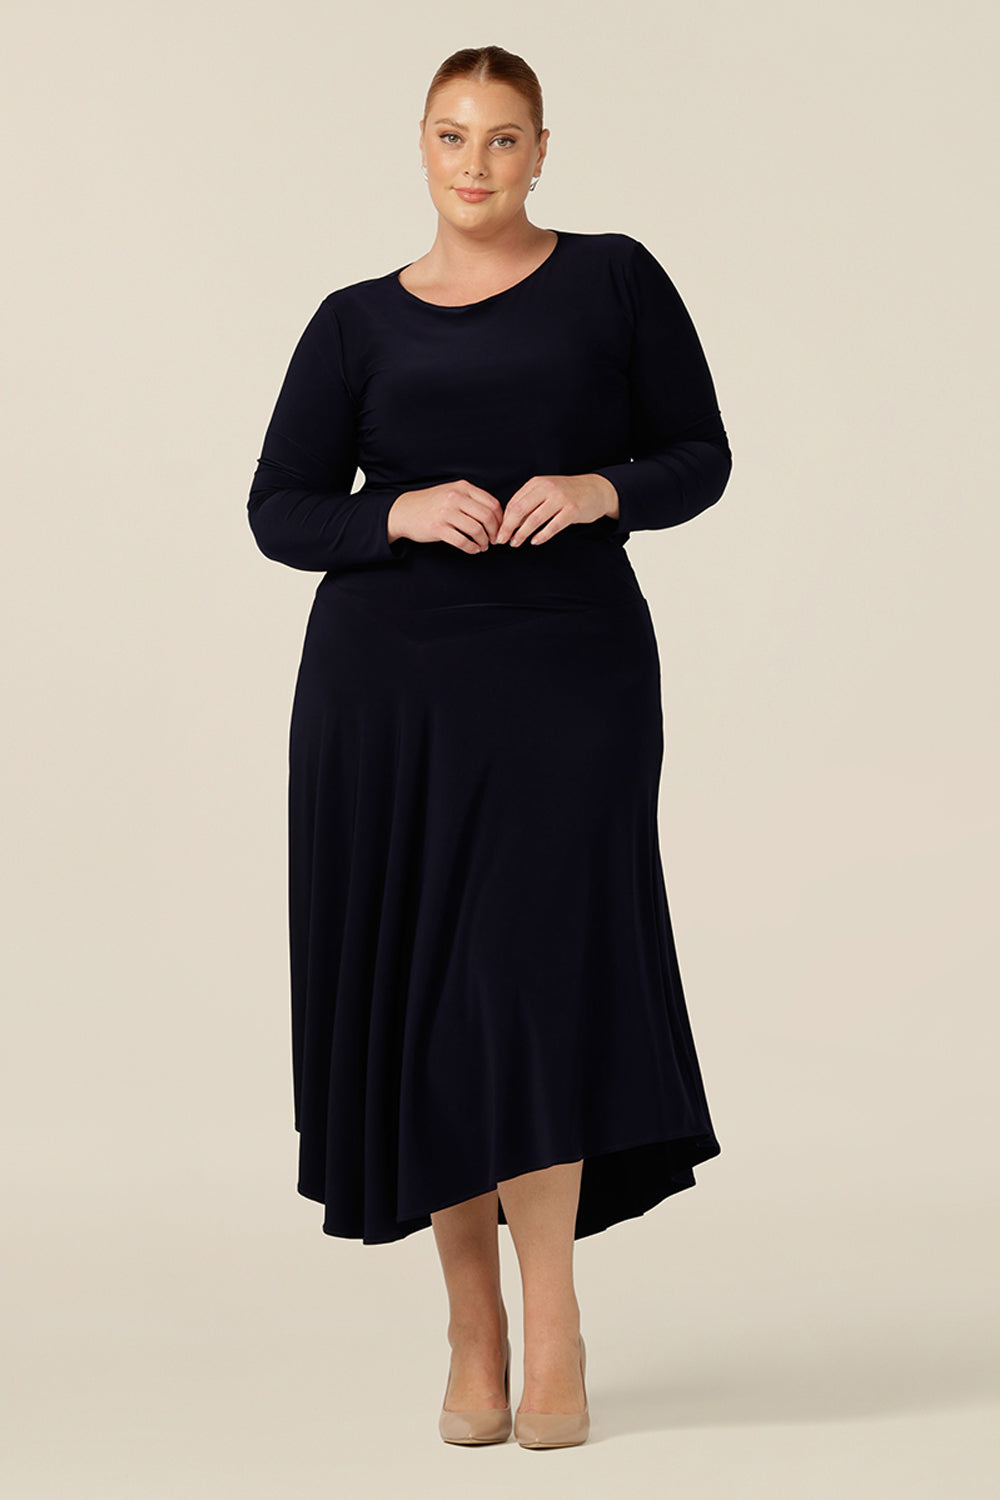 Layered with a navy top for a faux dress look, this pull-on skirt with midi-length, asymmetric hemline is classic for work and corporate wear or comfortable casual wear.